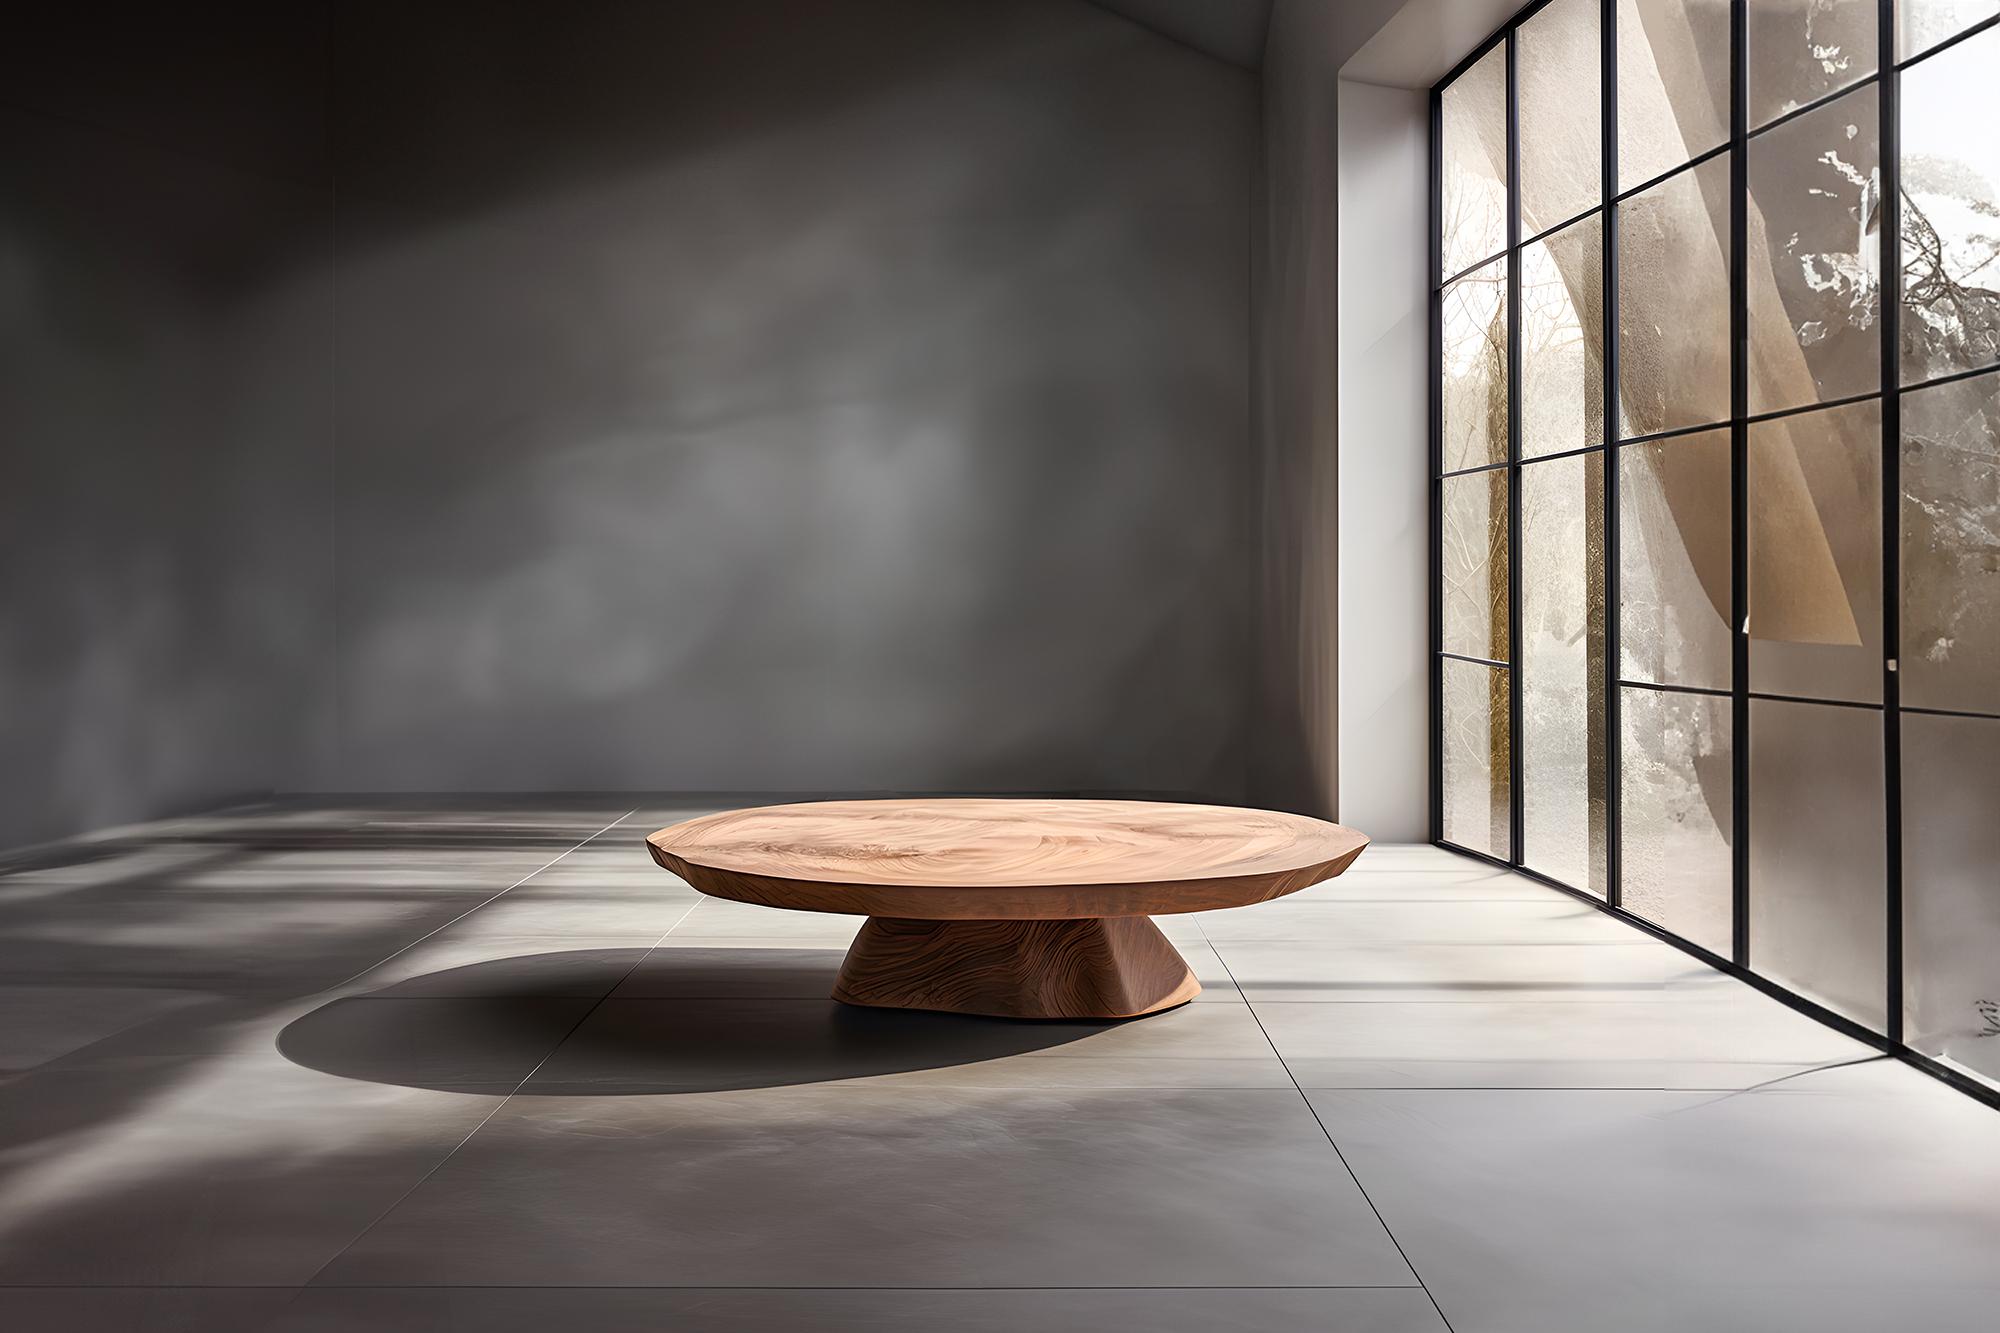 Sculptural Coffee Table Made of Solid Wood, Center Table Solace S49   by Joel Escalona


The Solace table series, designed by Joel Escalona, is a furniture collection that exudes balance and presence, thanks to its sensuous, dense, and irregular